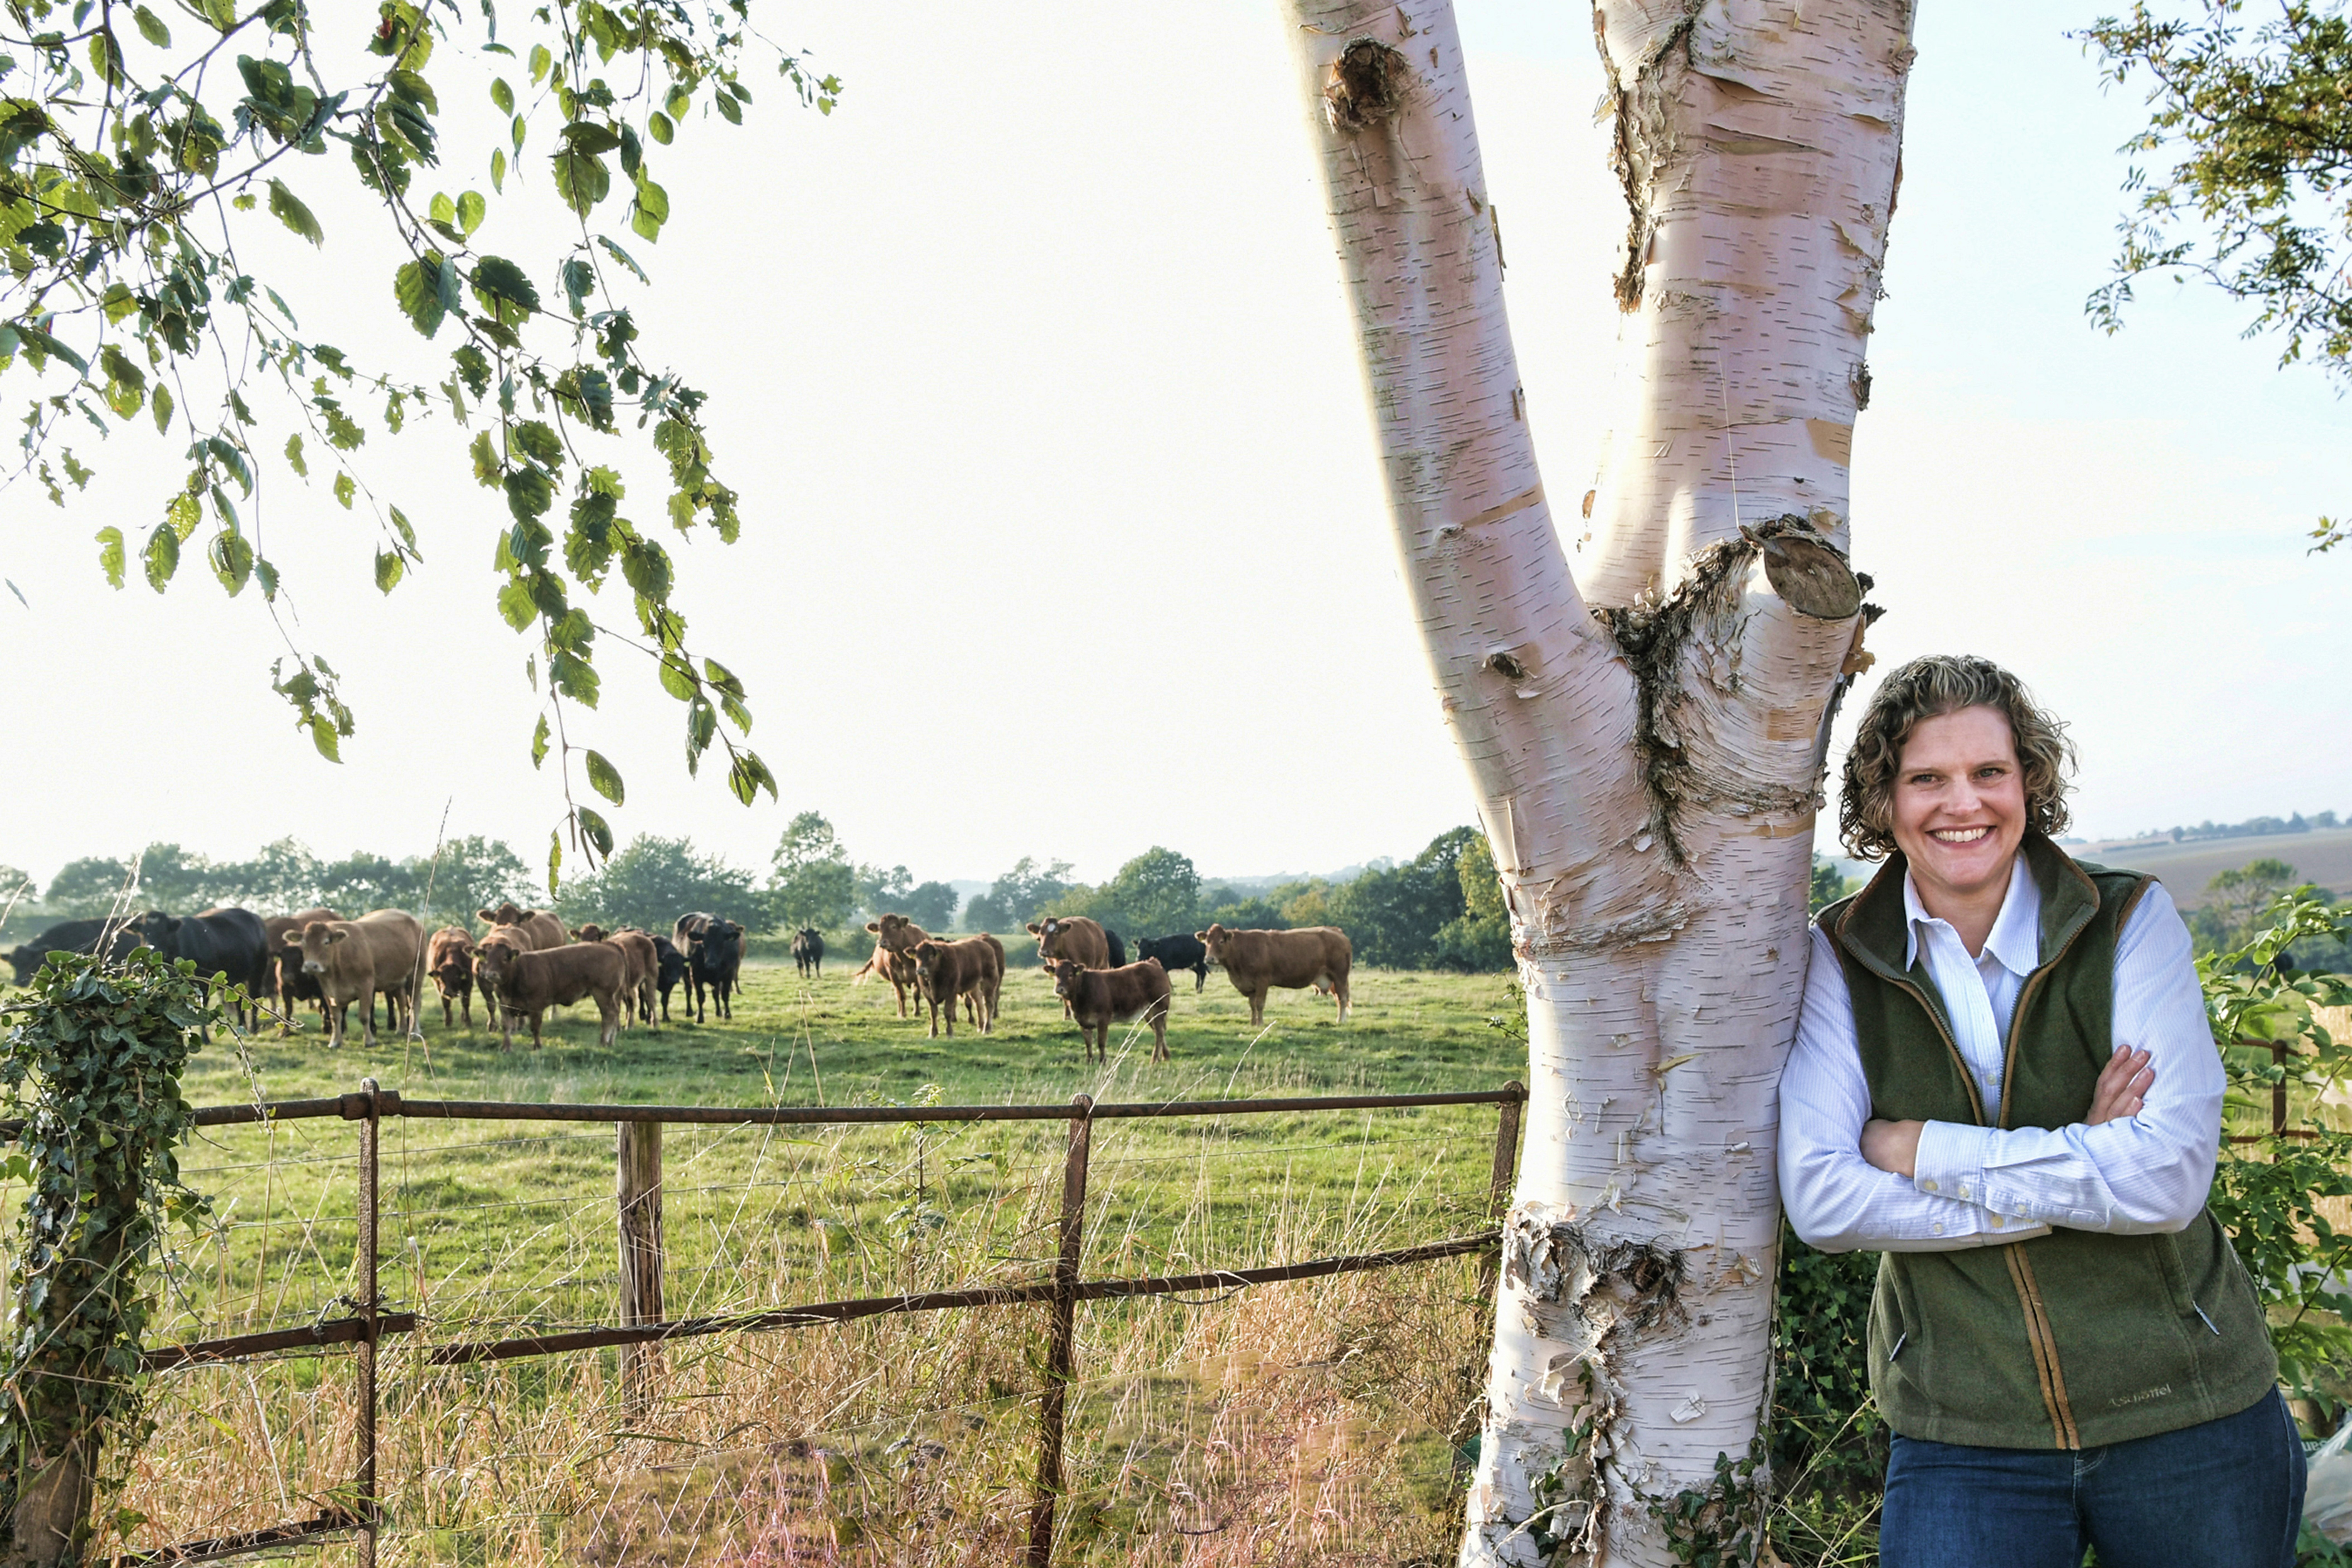 An image of NFU Crops Board member Sarah Bell taken on her farm with cattle in the field behind her.